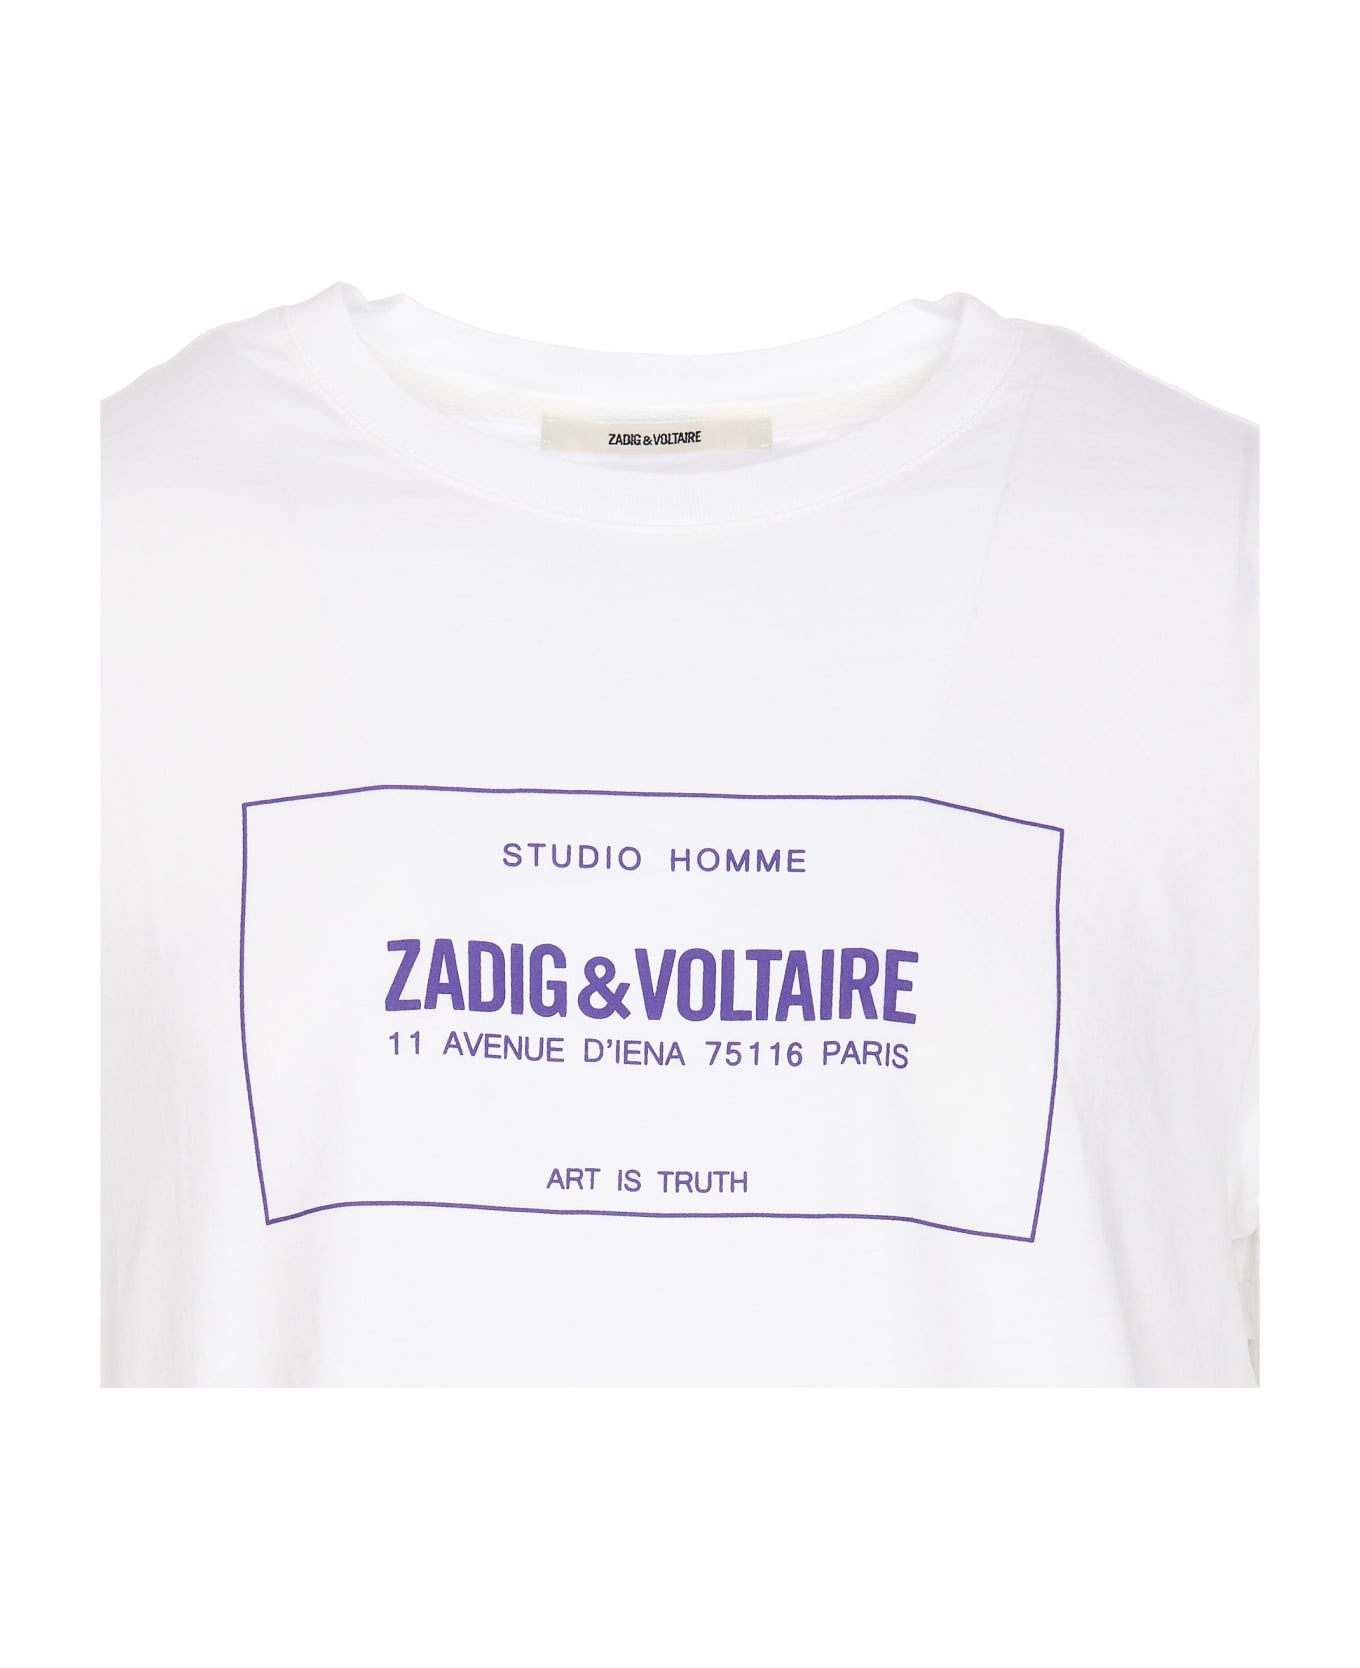 Zadig & Voltaire Ted Hc T-shirt - White